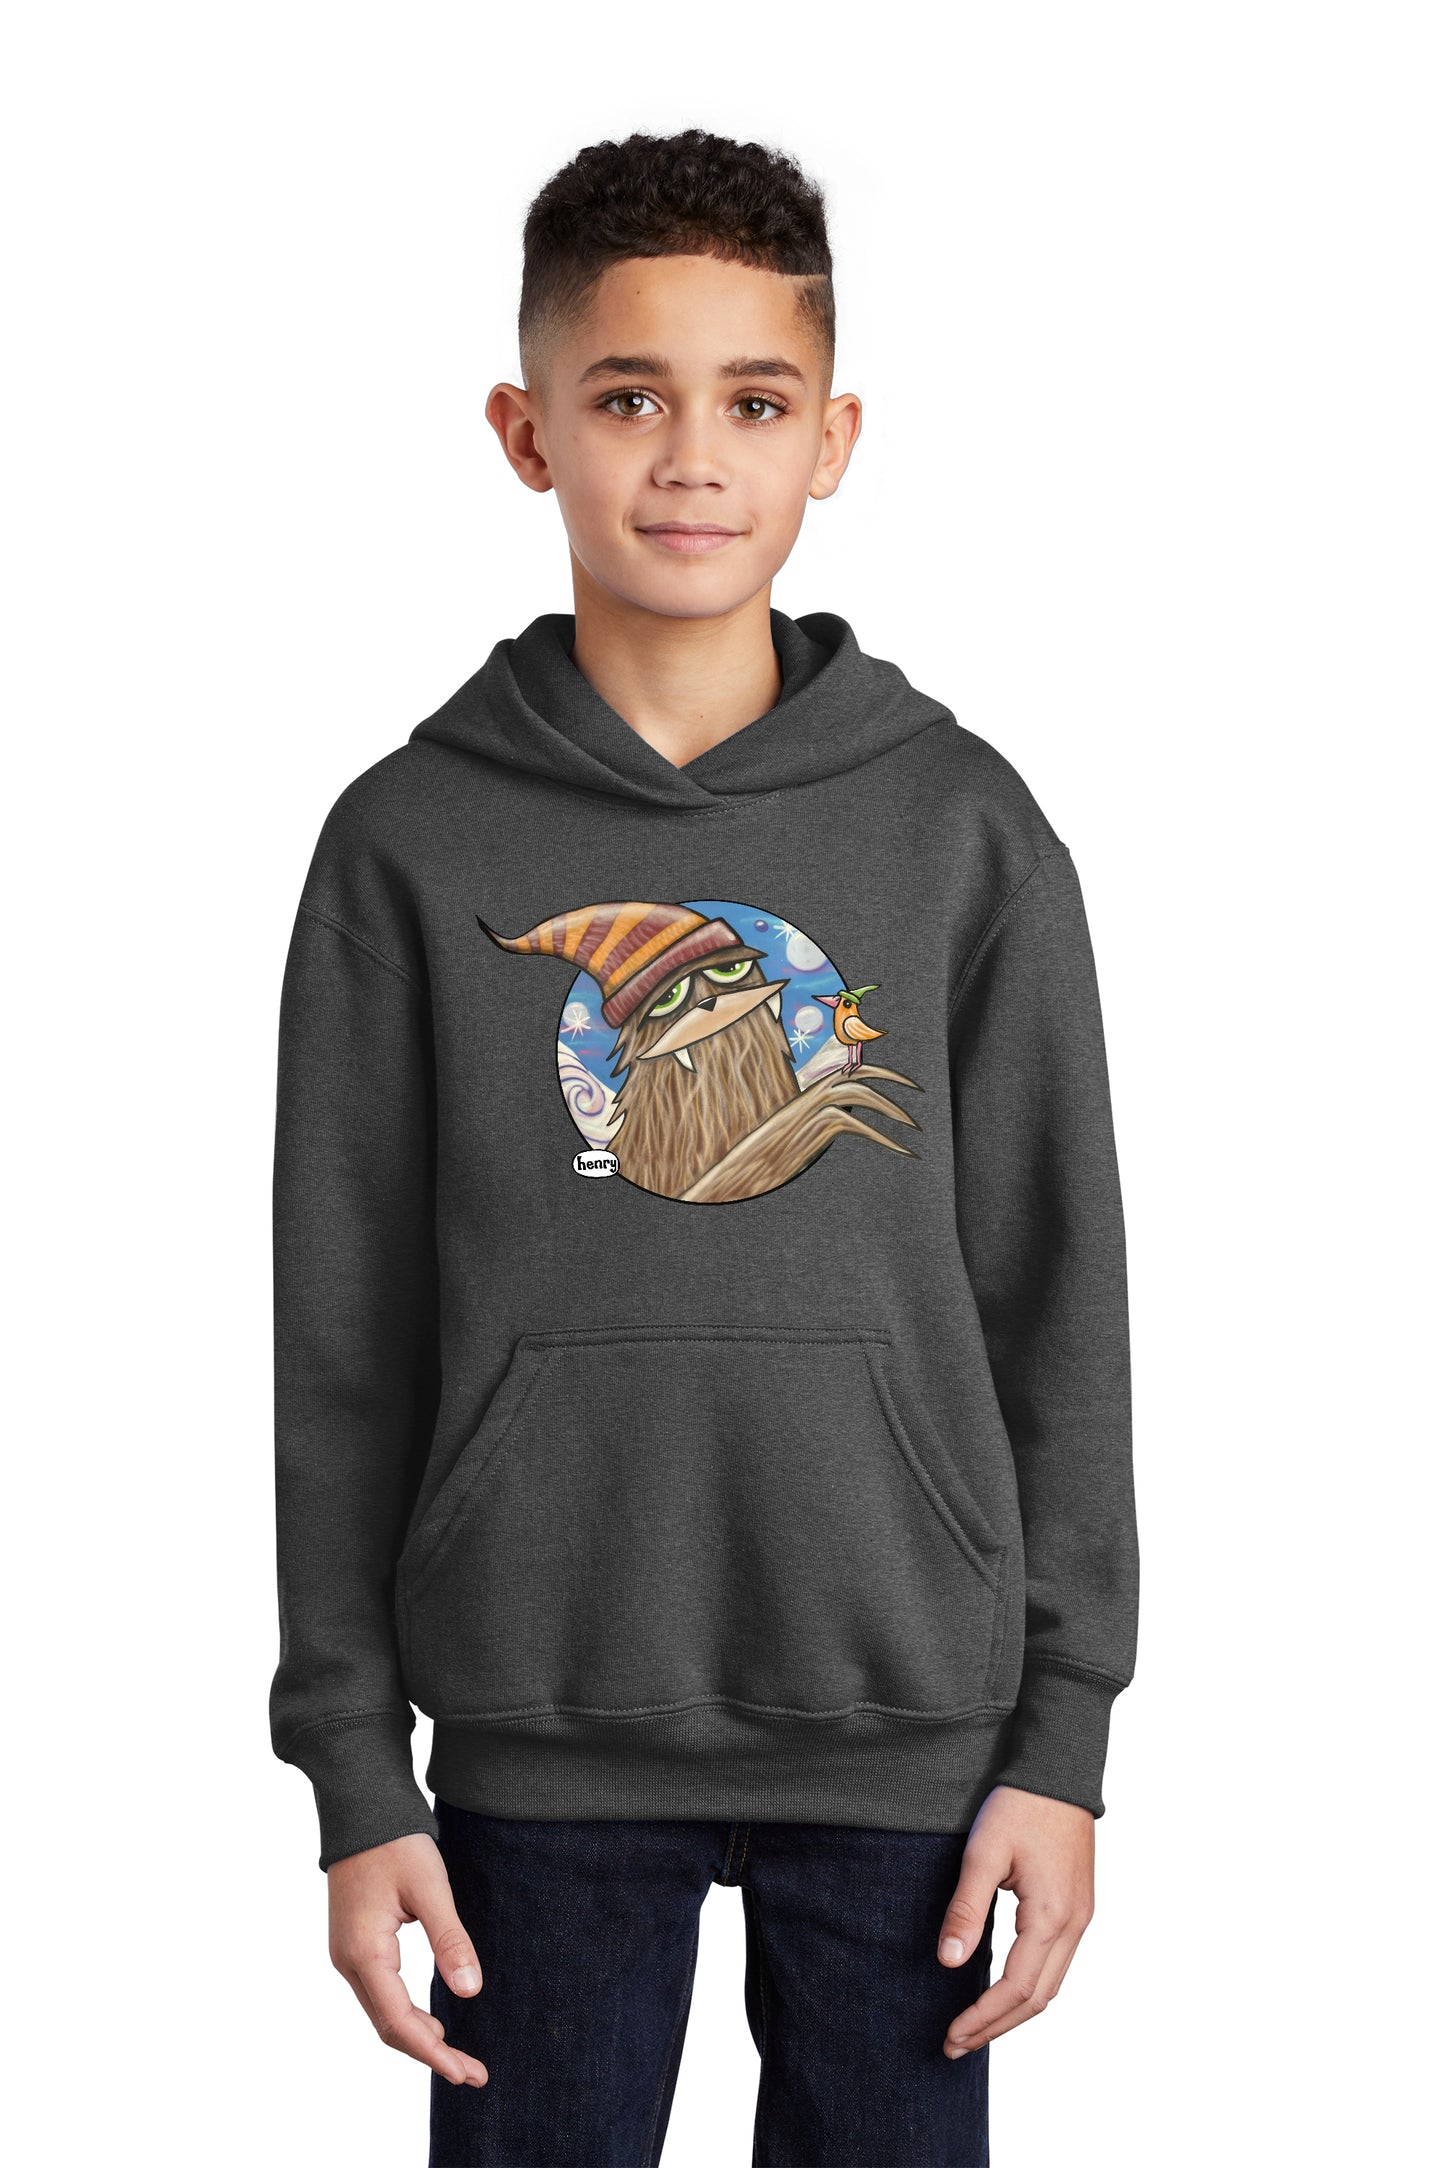 Sasquatch in Stocking Hat with Bird Youth Hoodie | Wearable Art by Seattle Mural Artist Ryan "Henry" Ward